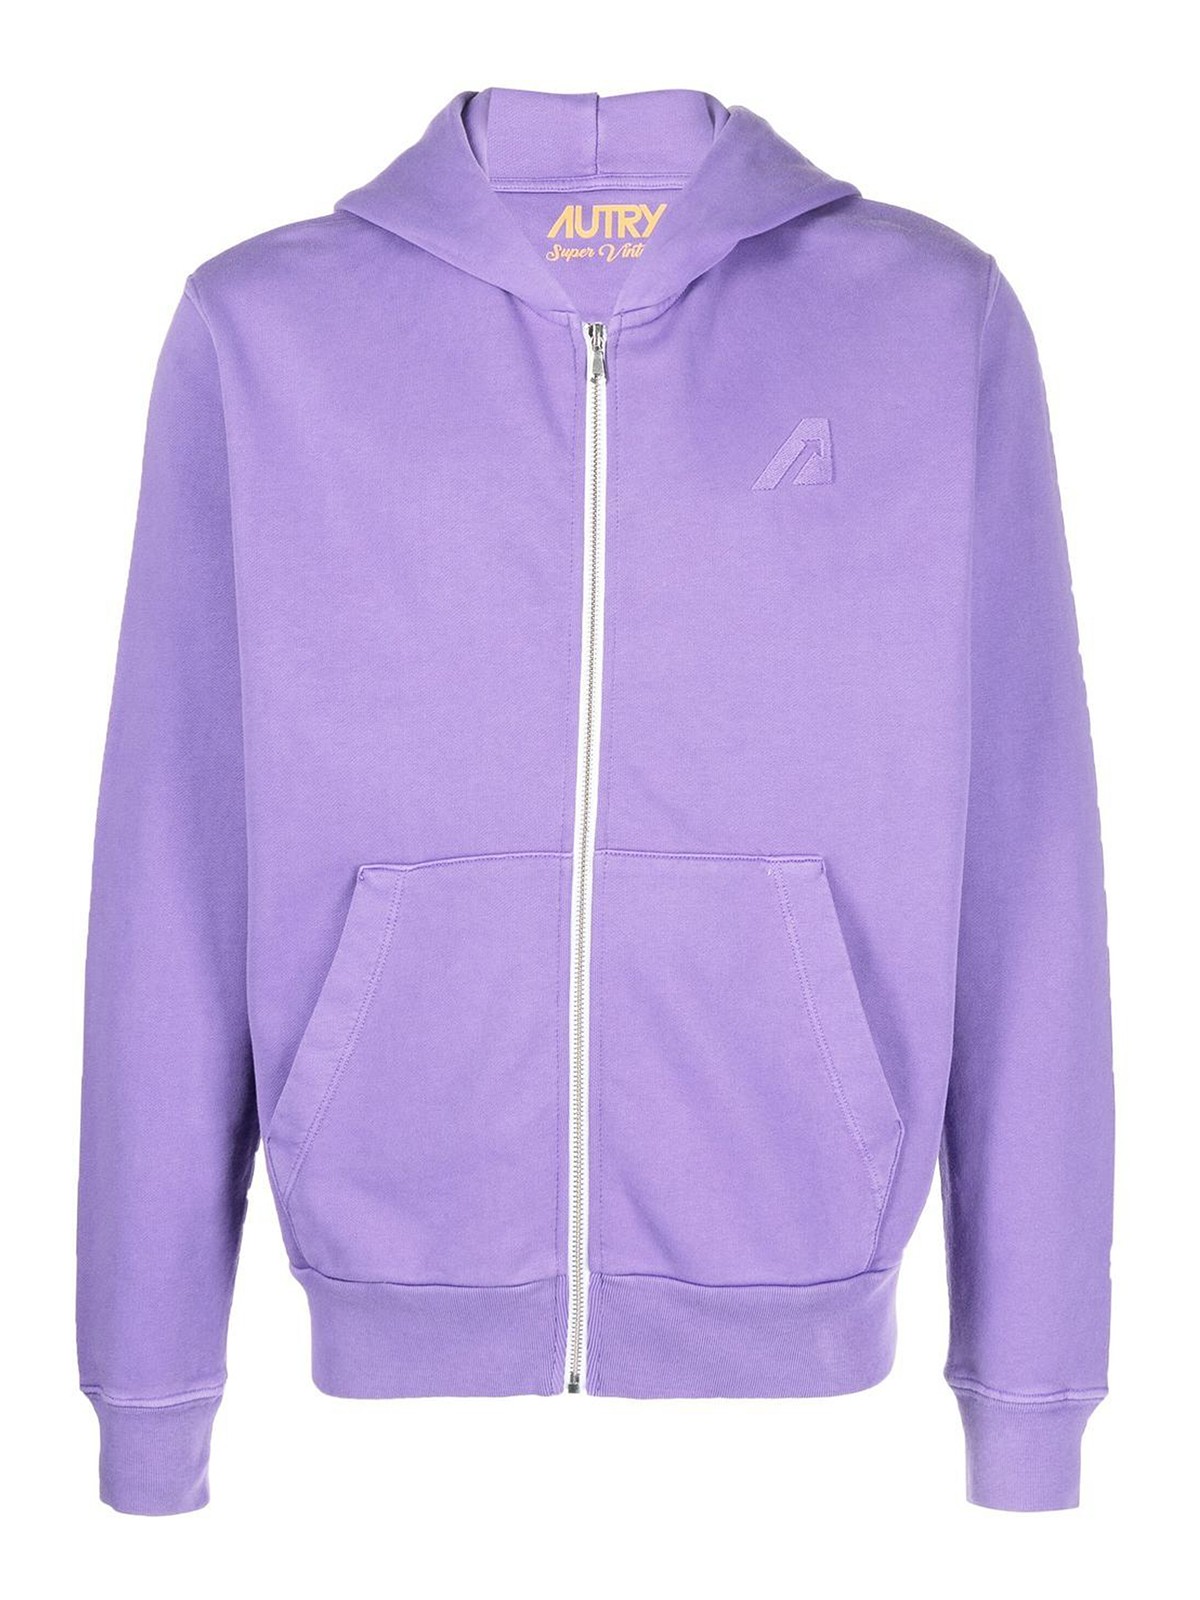 Autry Zipped Cotton Sweatshirts With Hoodie In Purple